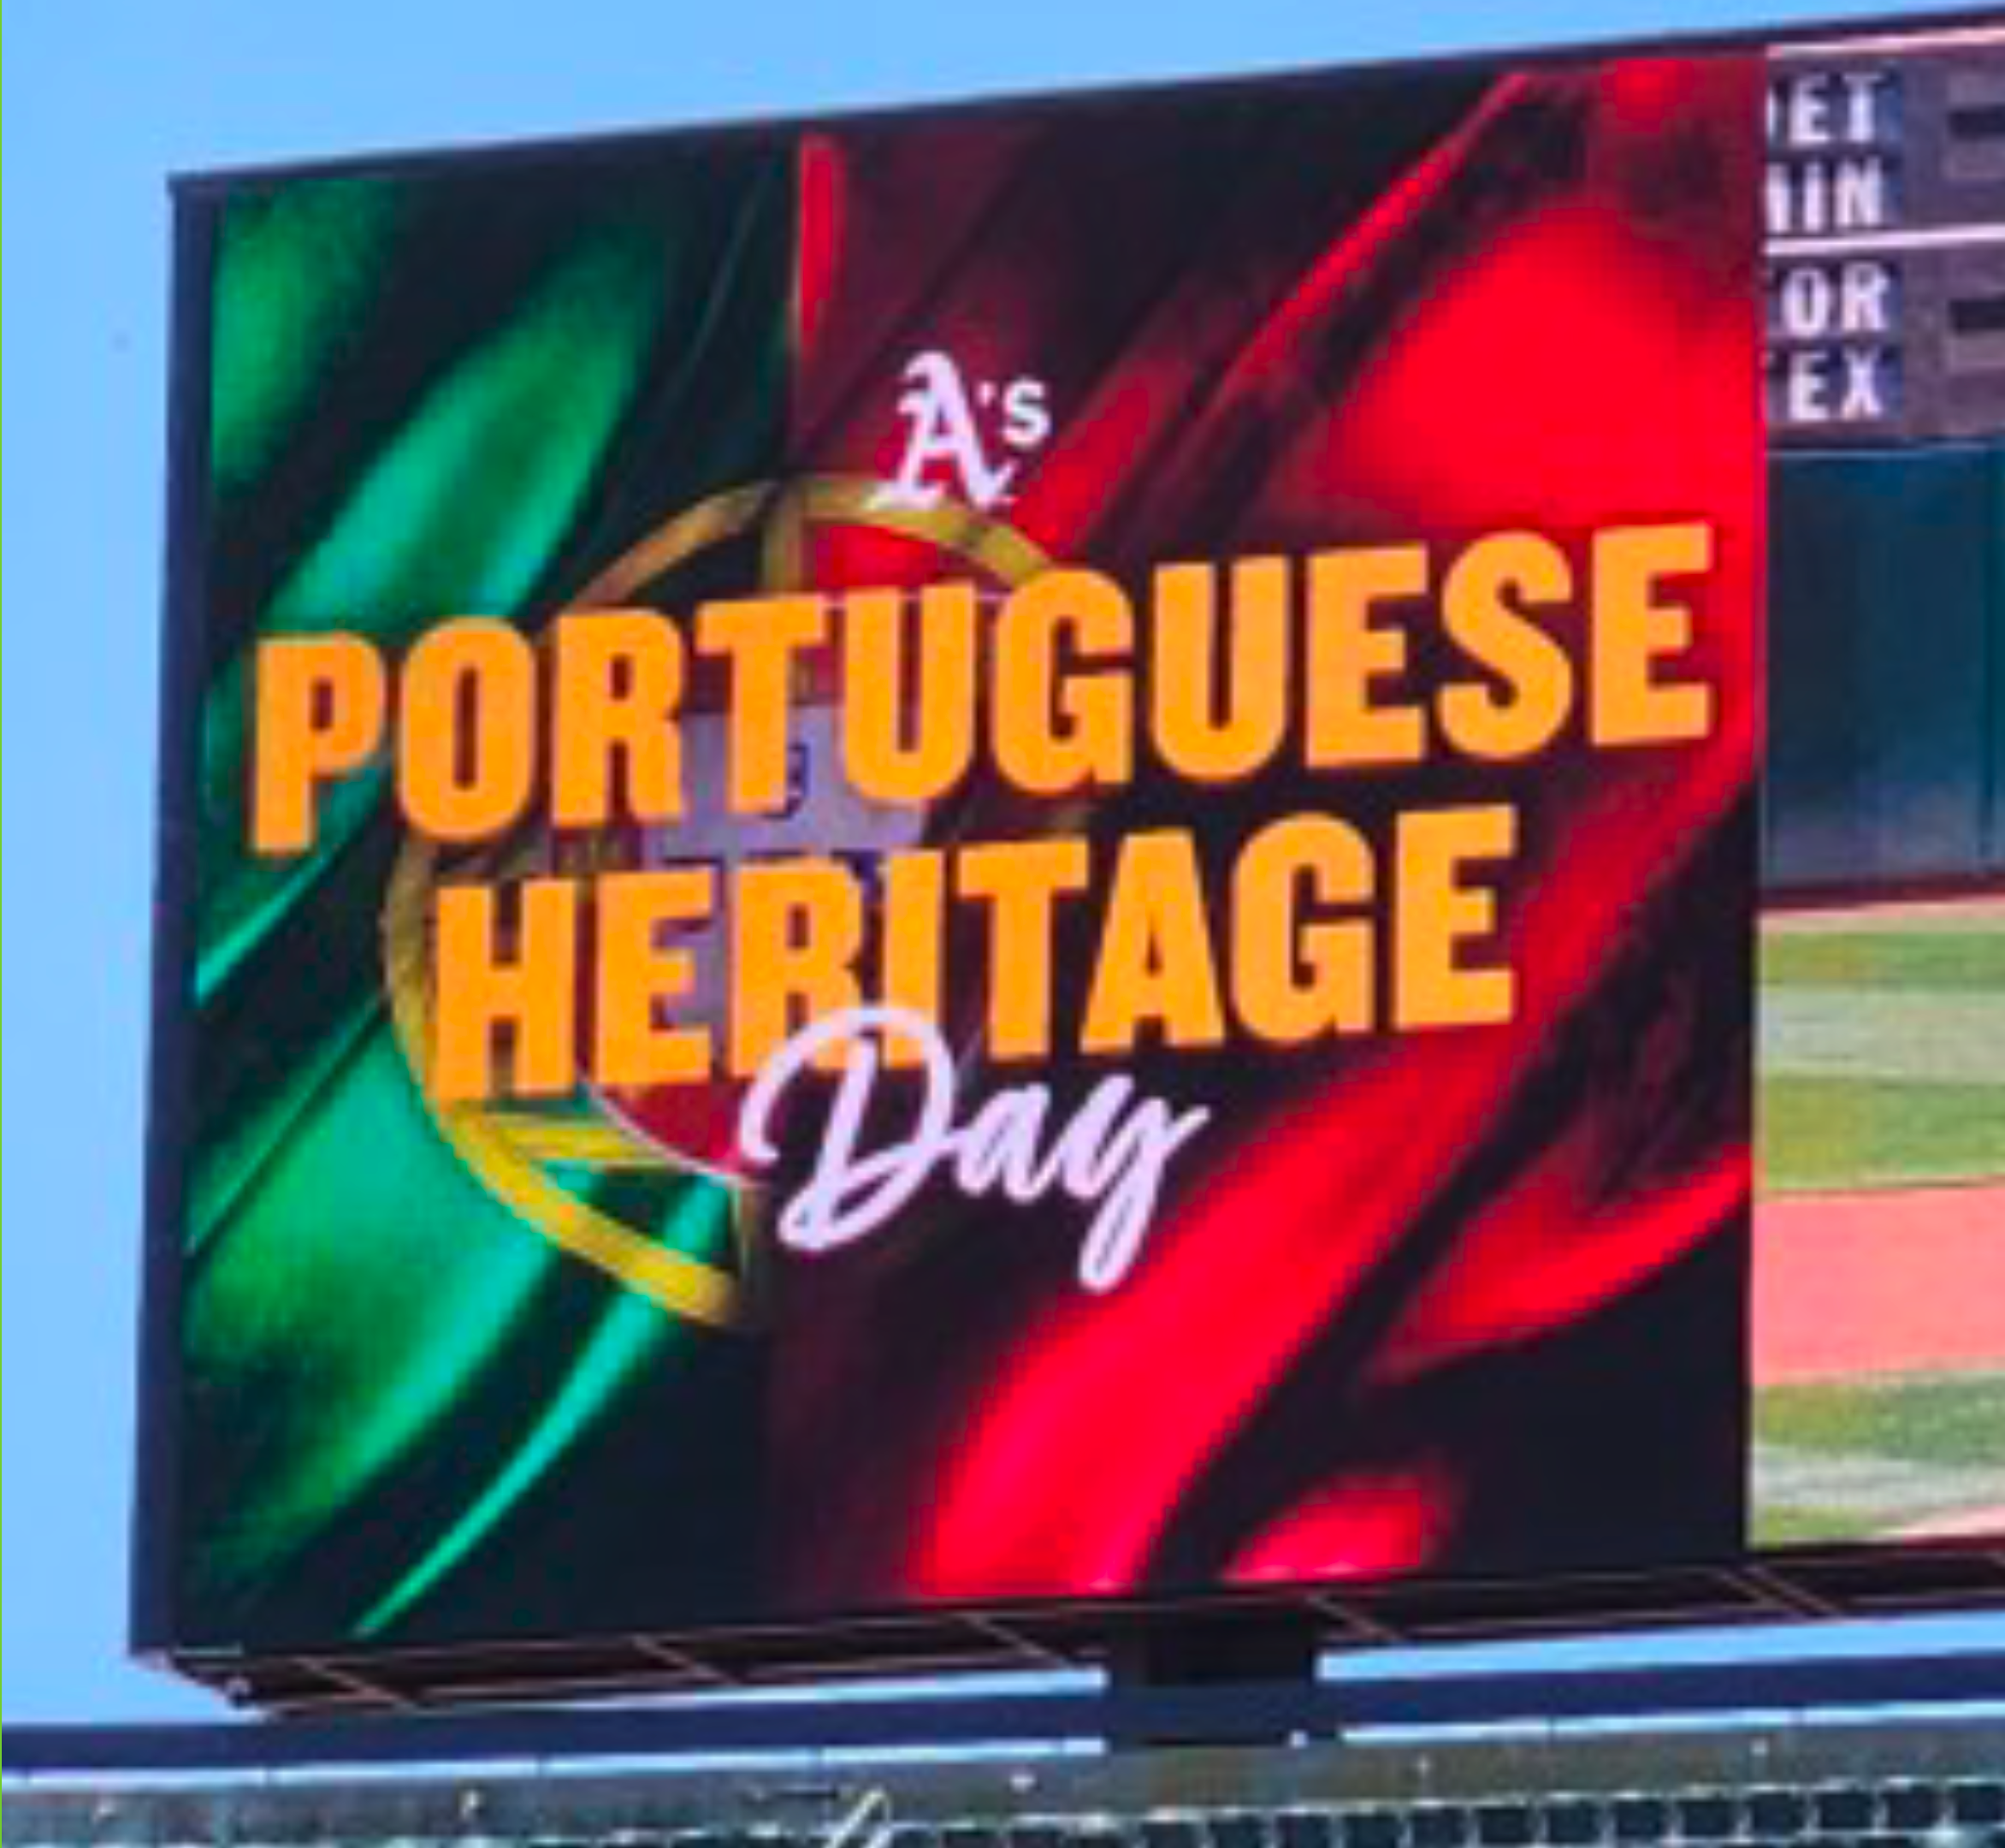 Event_2023 Portuguese Heritage Day Oakland A's_9.54.43 AM